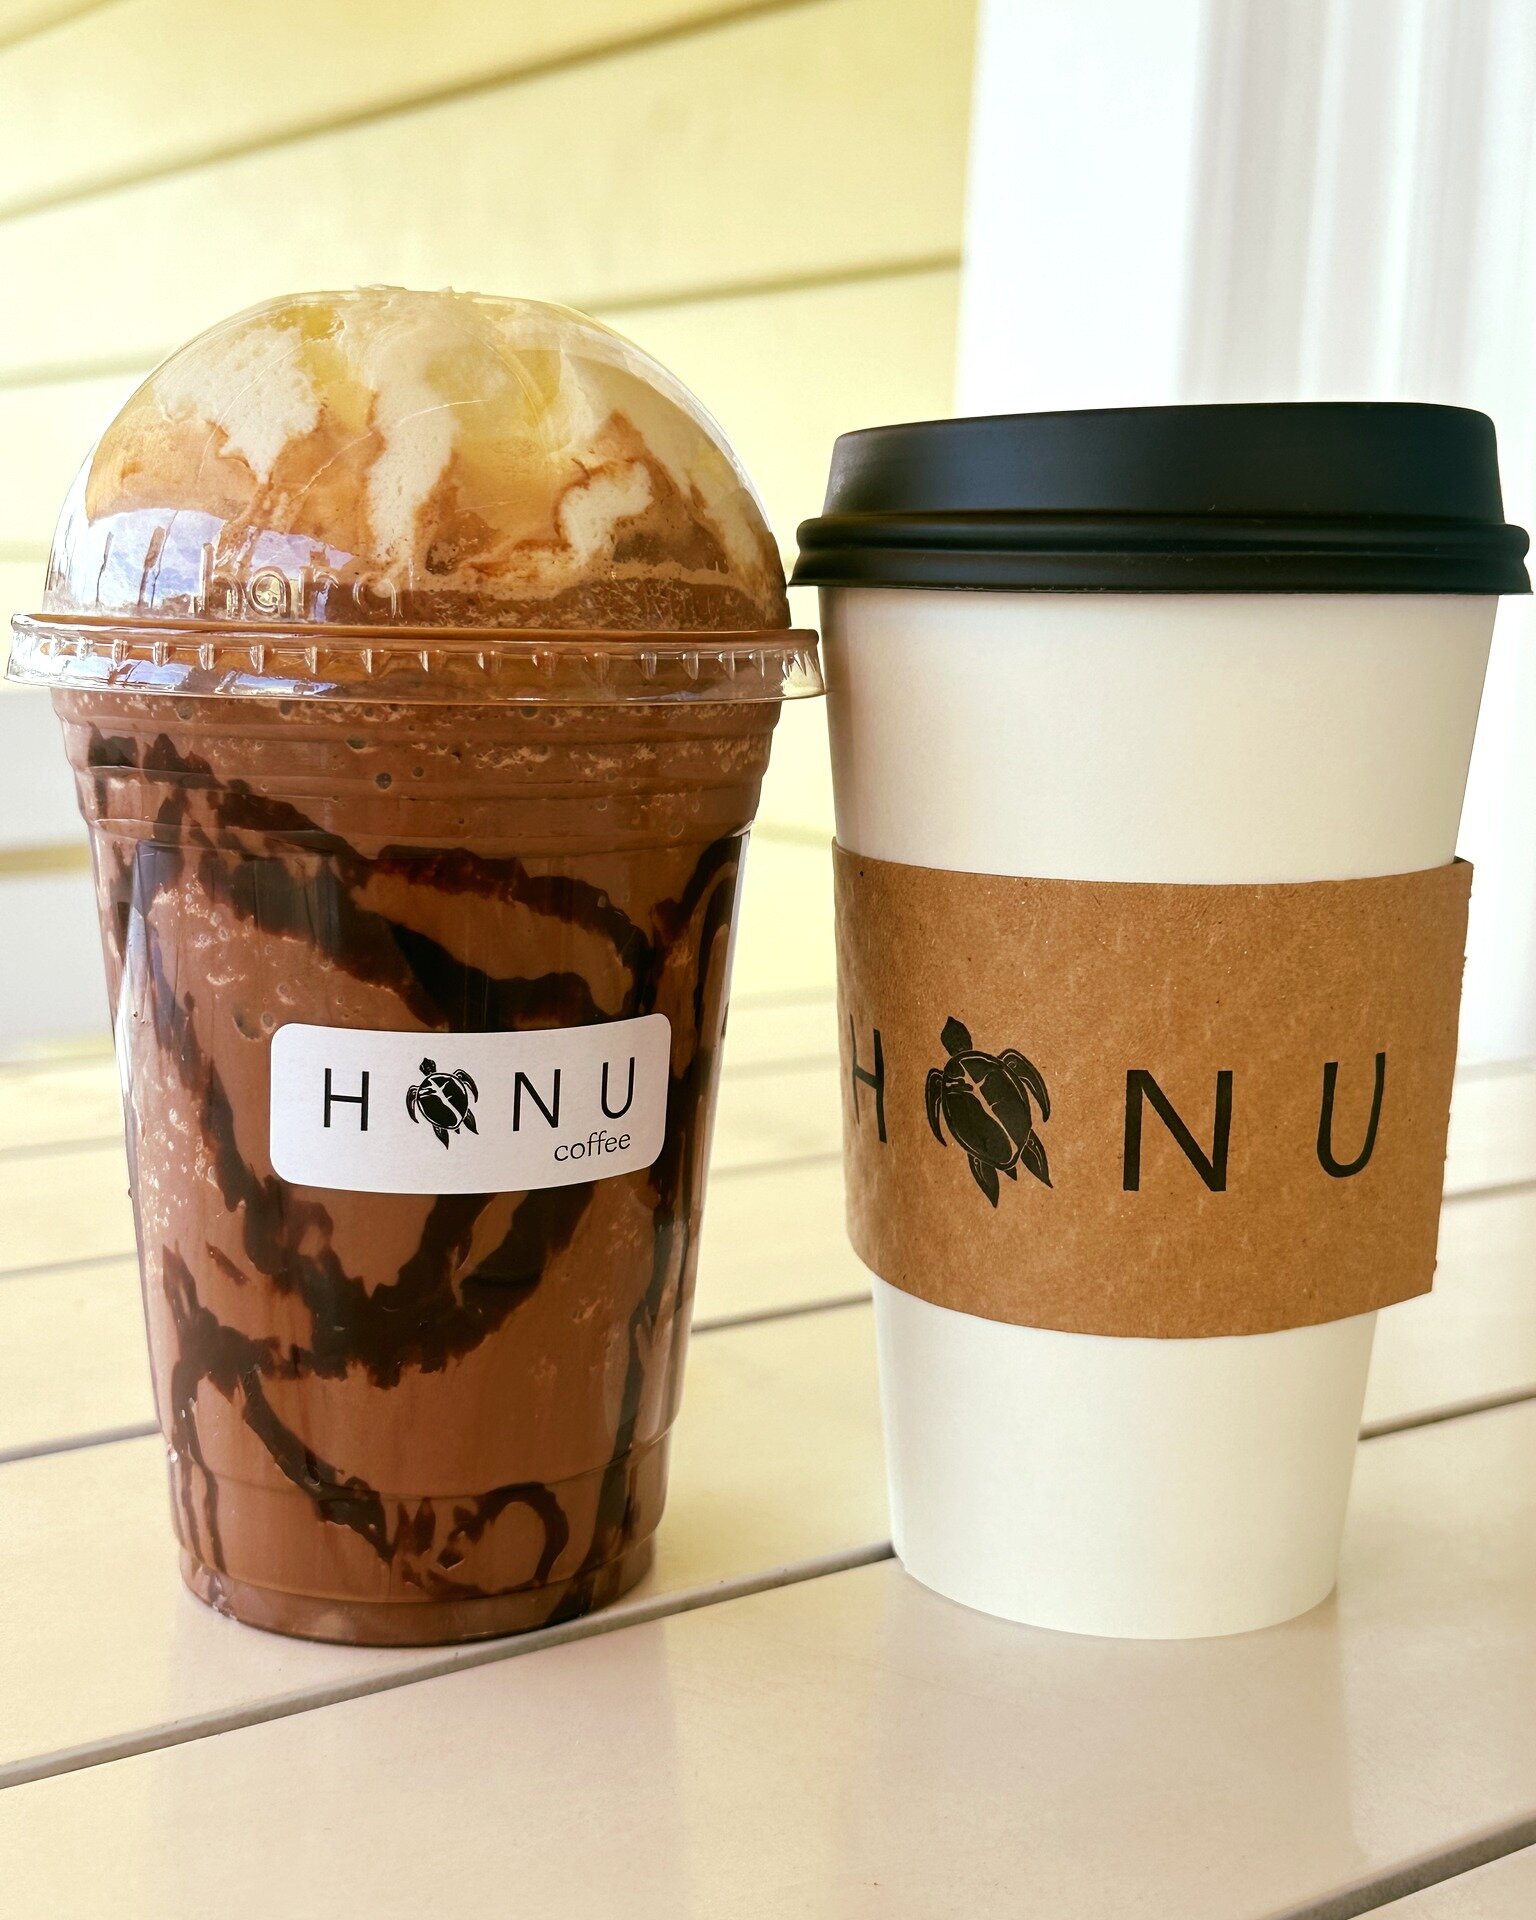 It doesn't matter how you like your Honu, we're always sweet on our supportive community! &hearts;️ What's your favorite Honu drink? Tell us in the comments! 👇🏻 #homesweetHonu